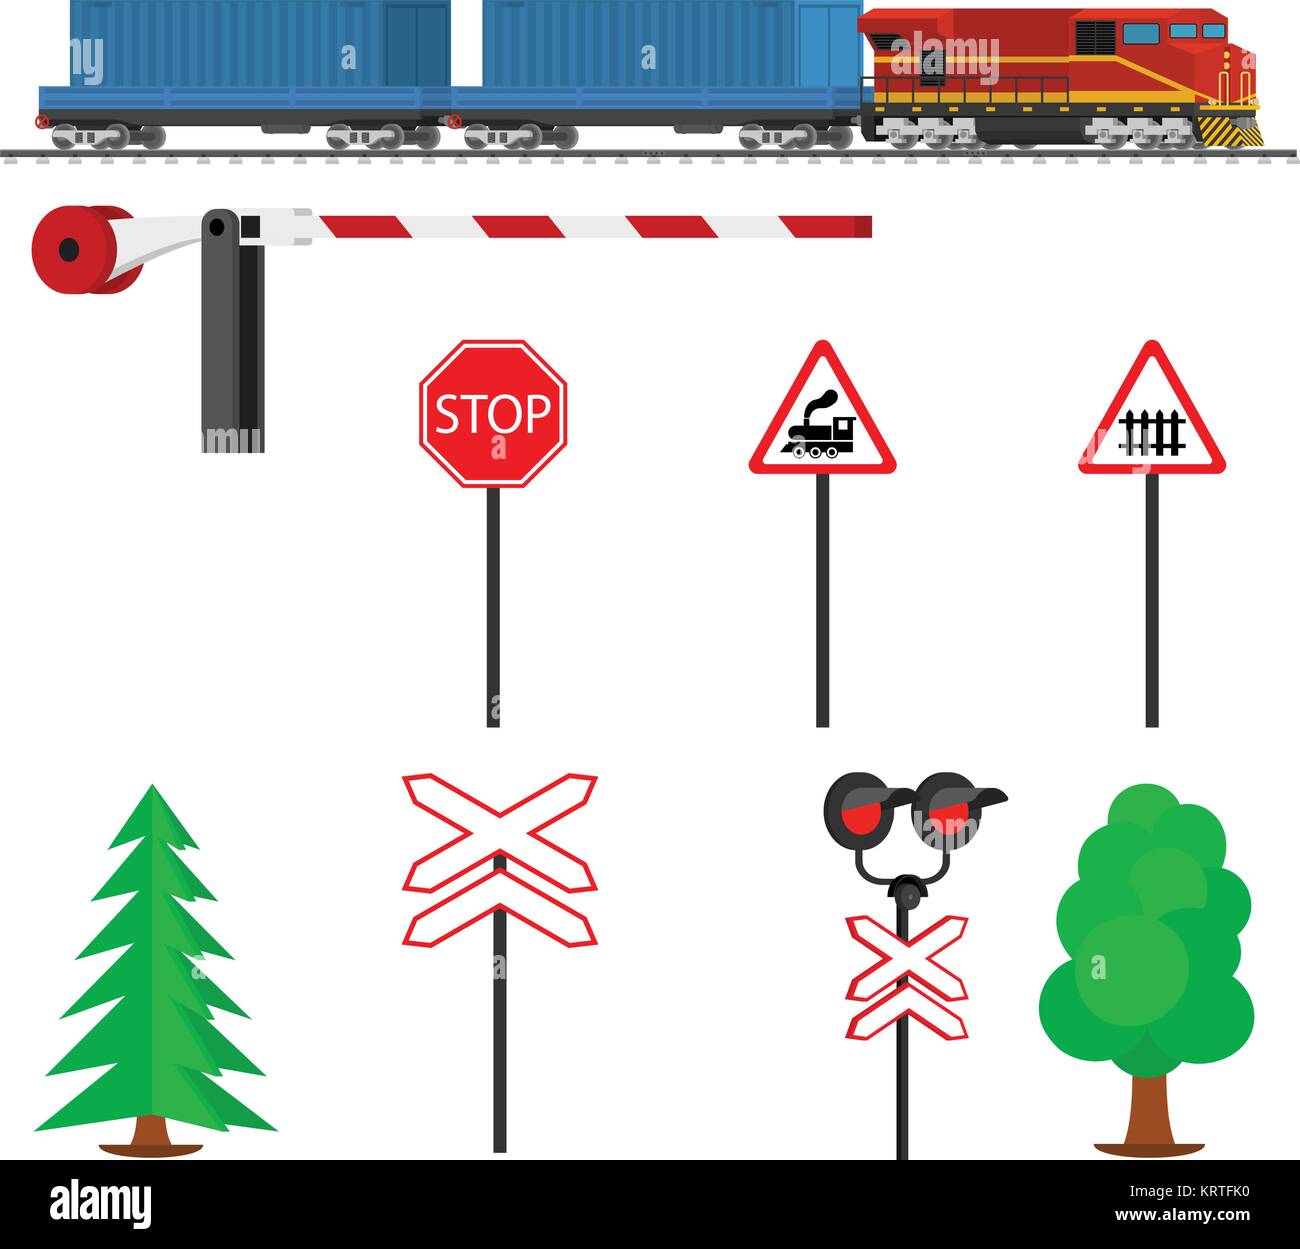 Railroad traffic way and train with containers. Railroad train transportation. Railway equipment with signs, barriers, alarms, traffic lights. Flat ic Stock Vector